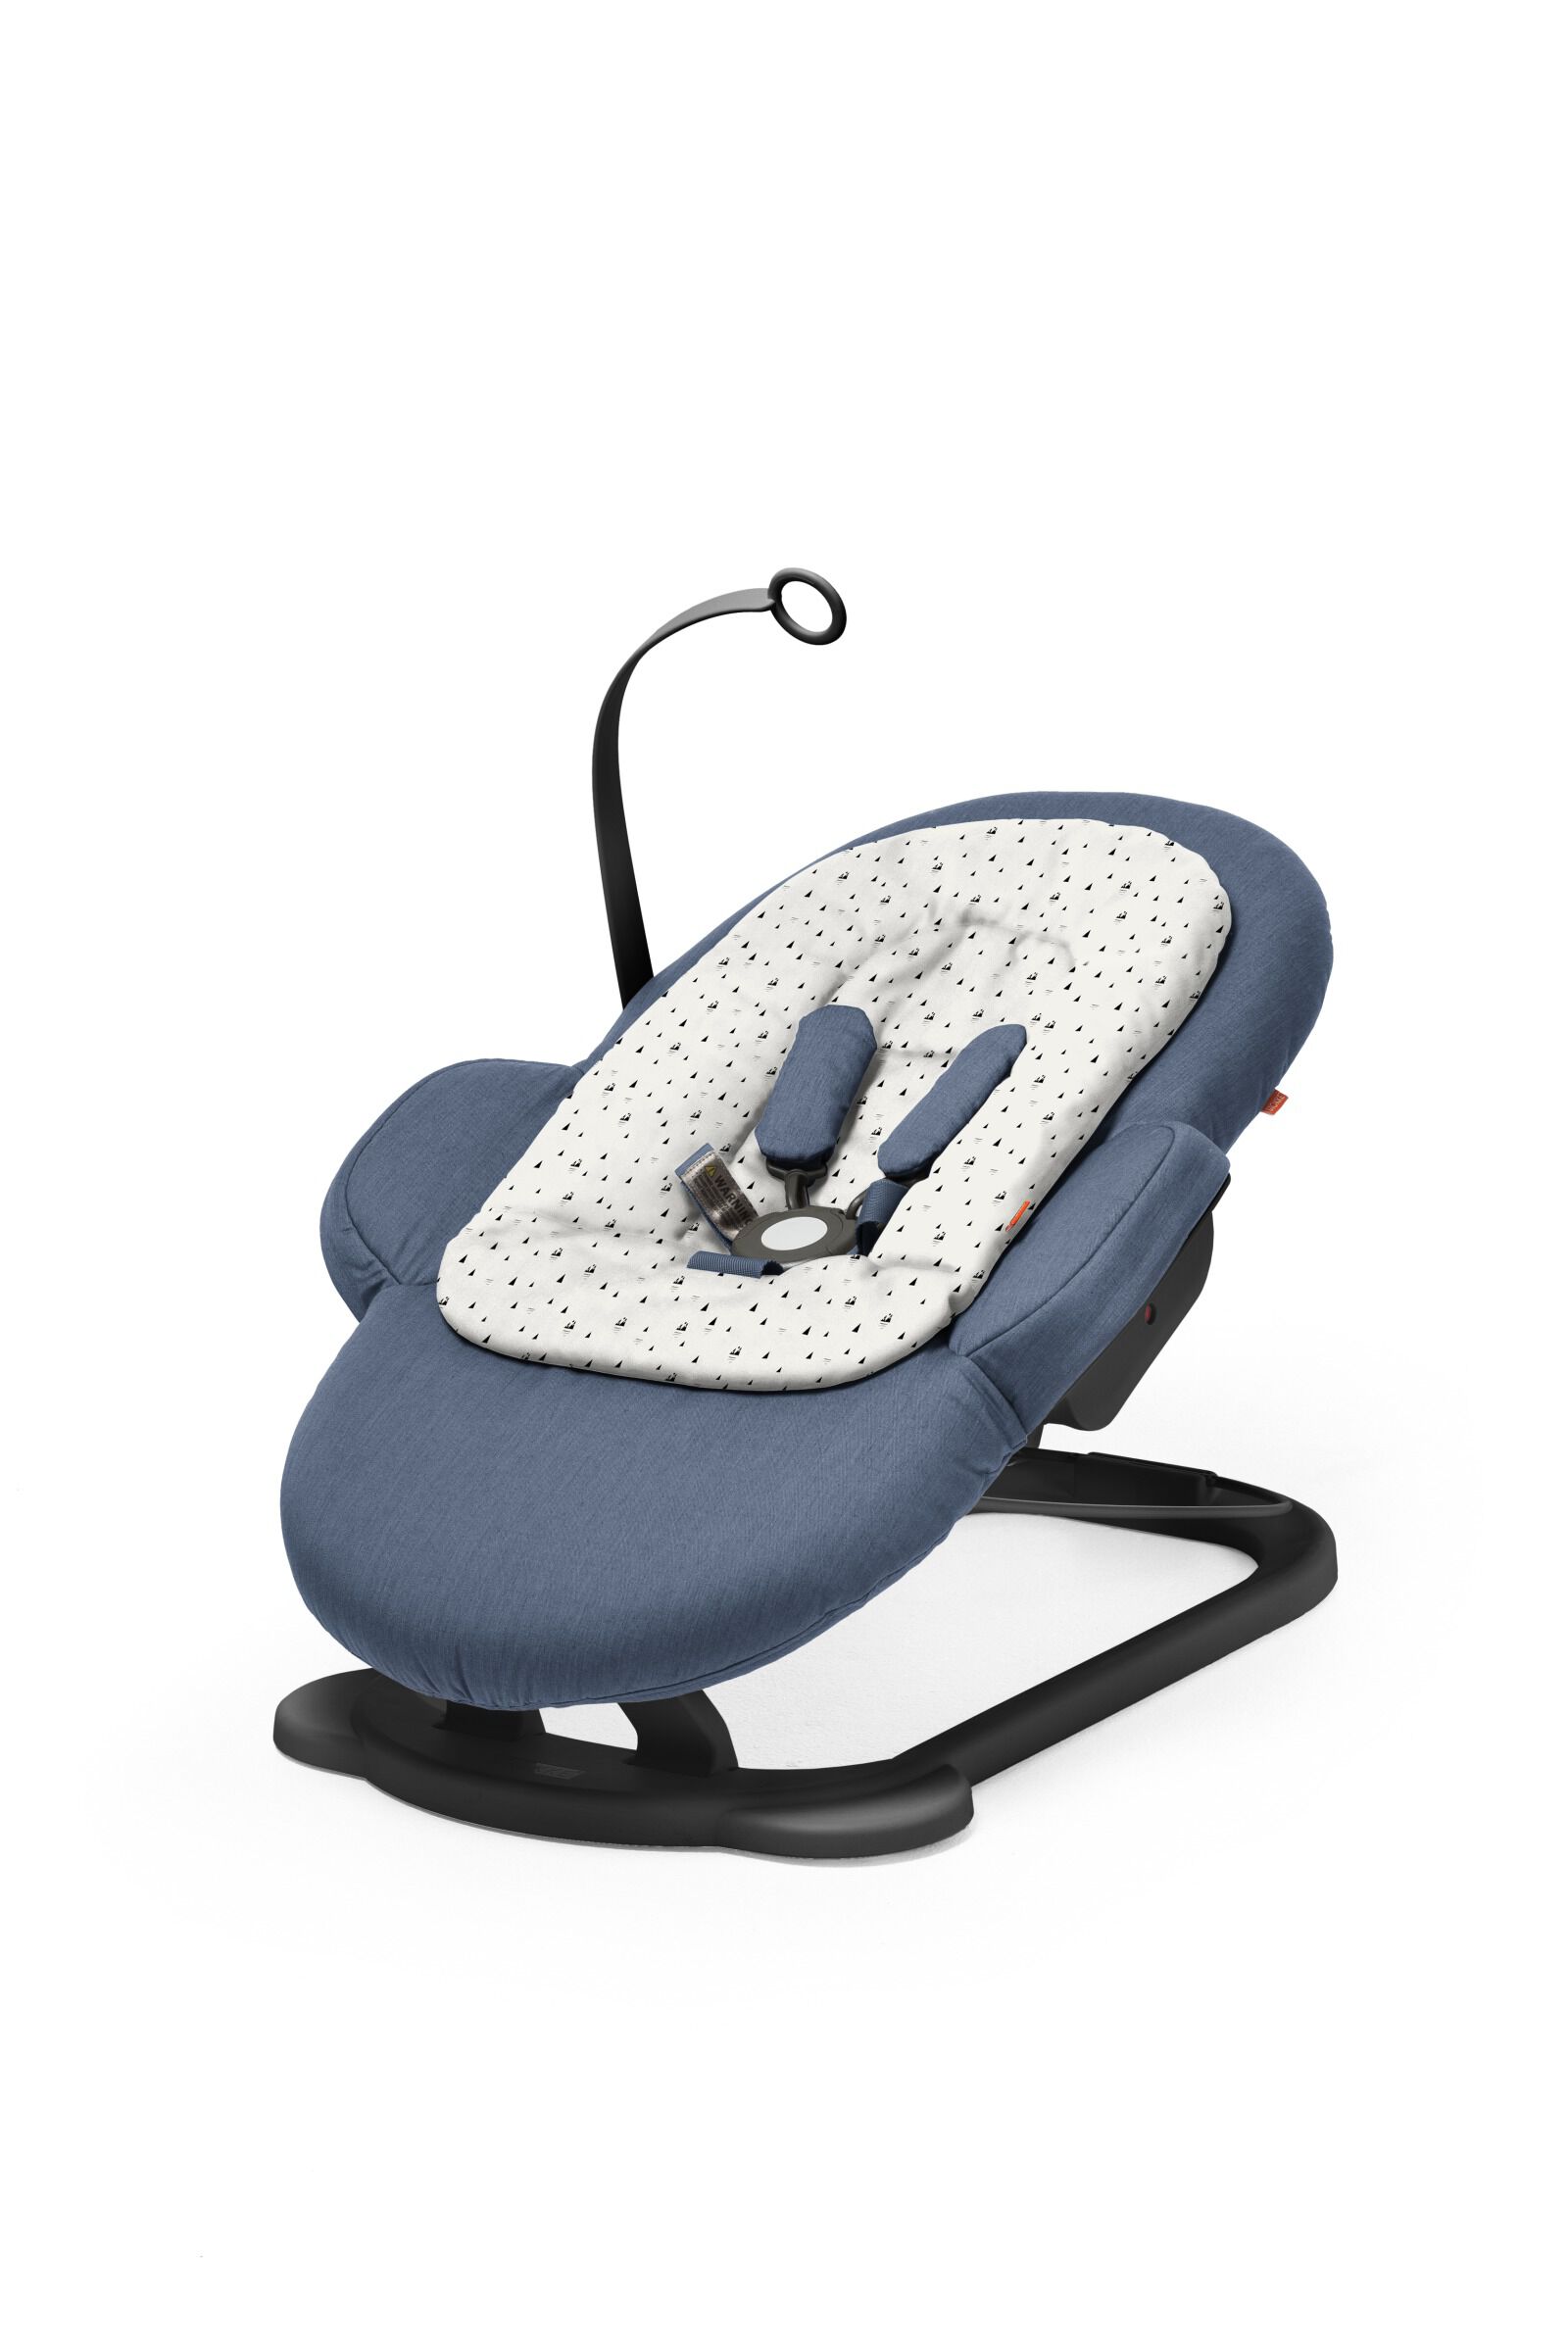 stokke baby steps high chair